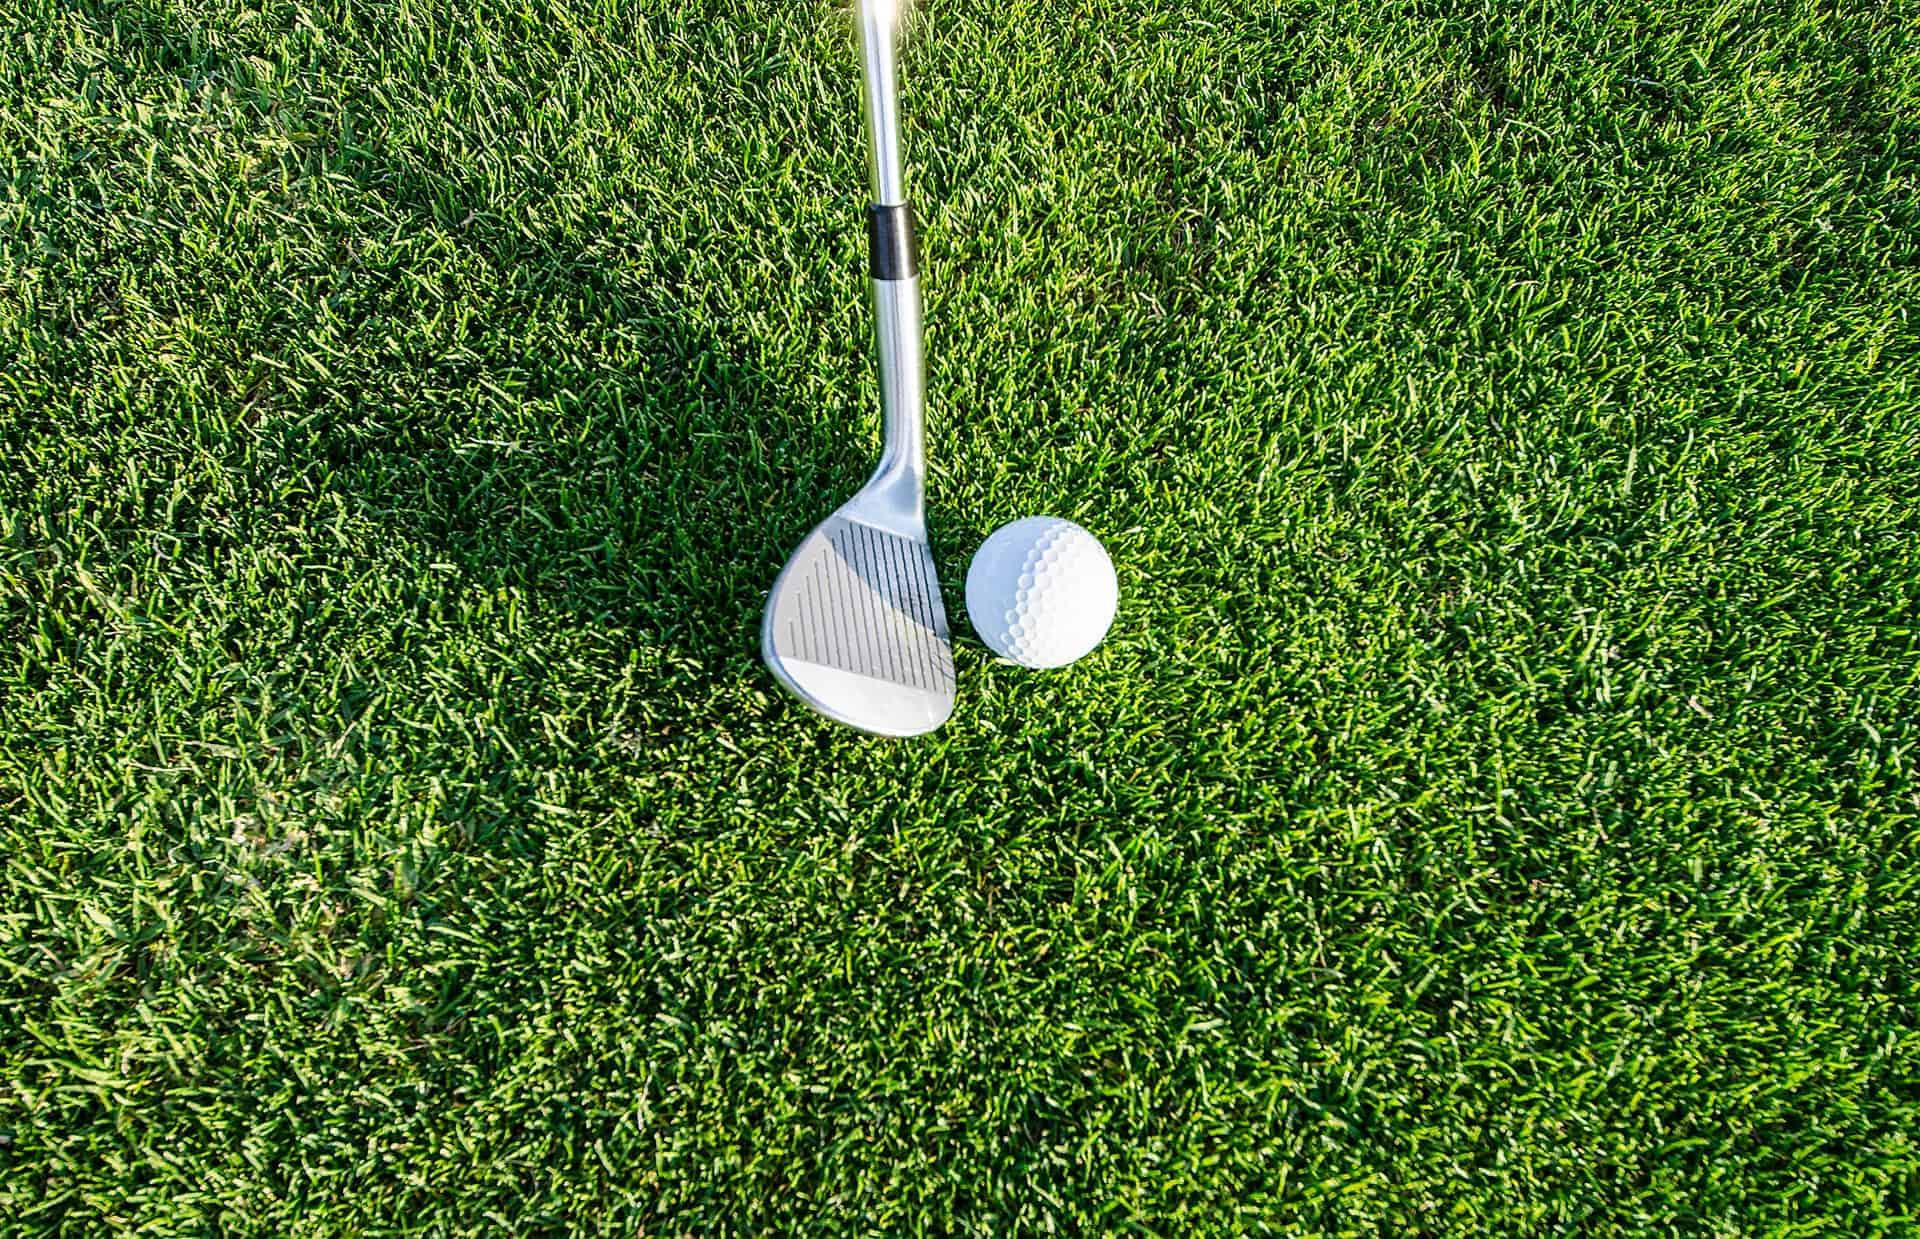 A beginner’s guide to the game of golf